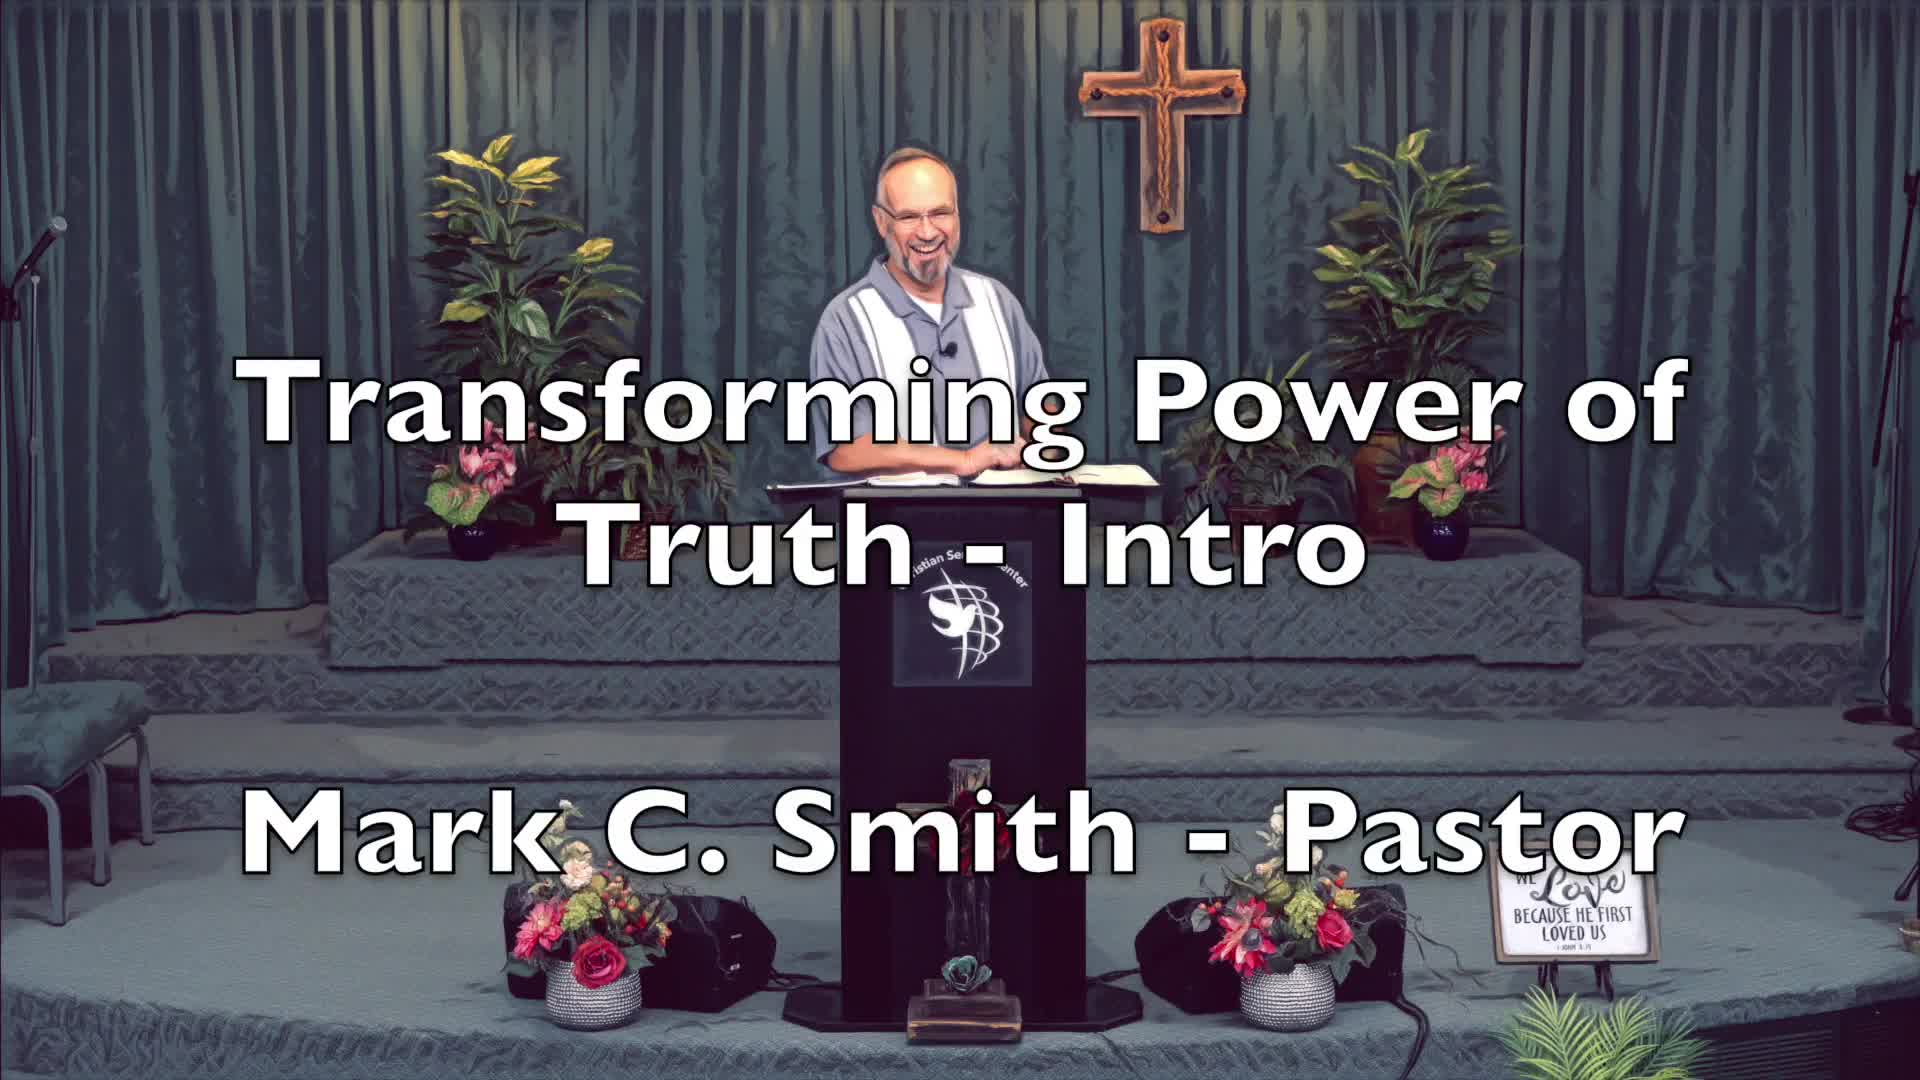 Transforming Power of Truth - Intro